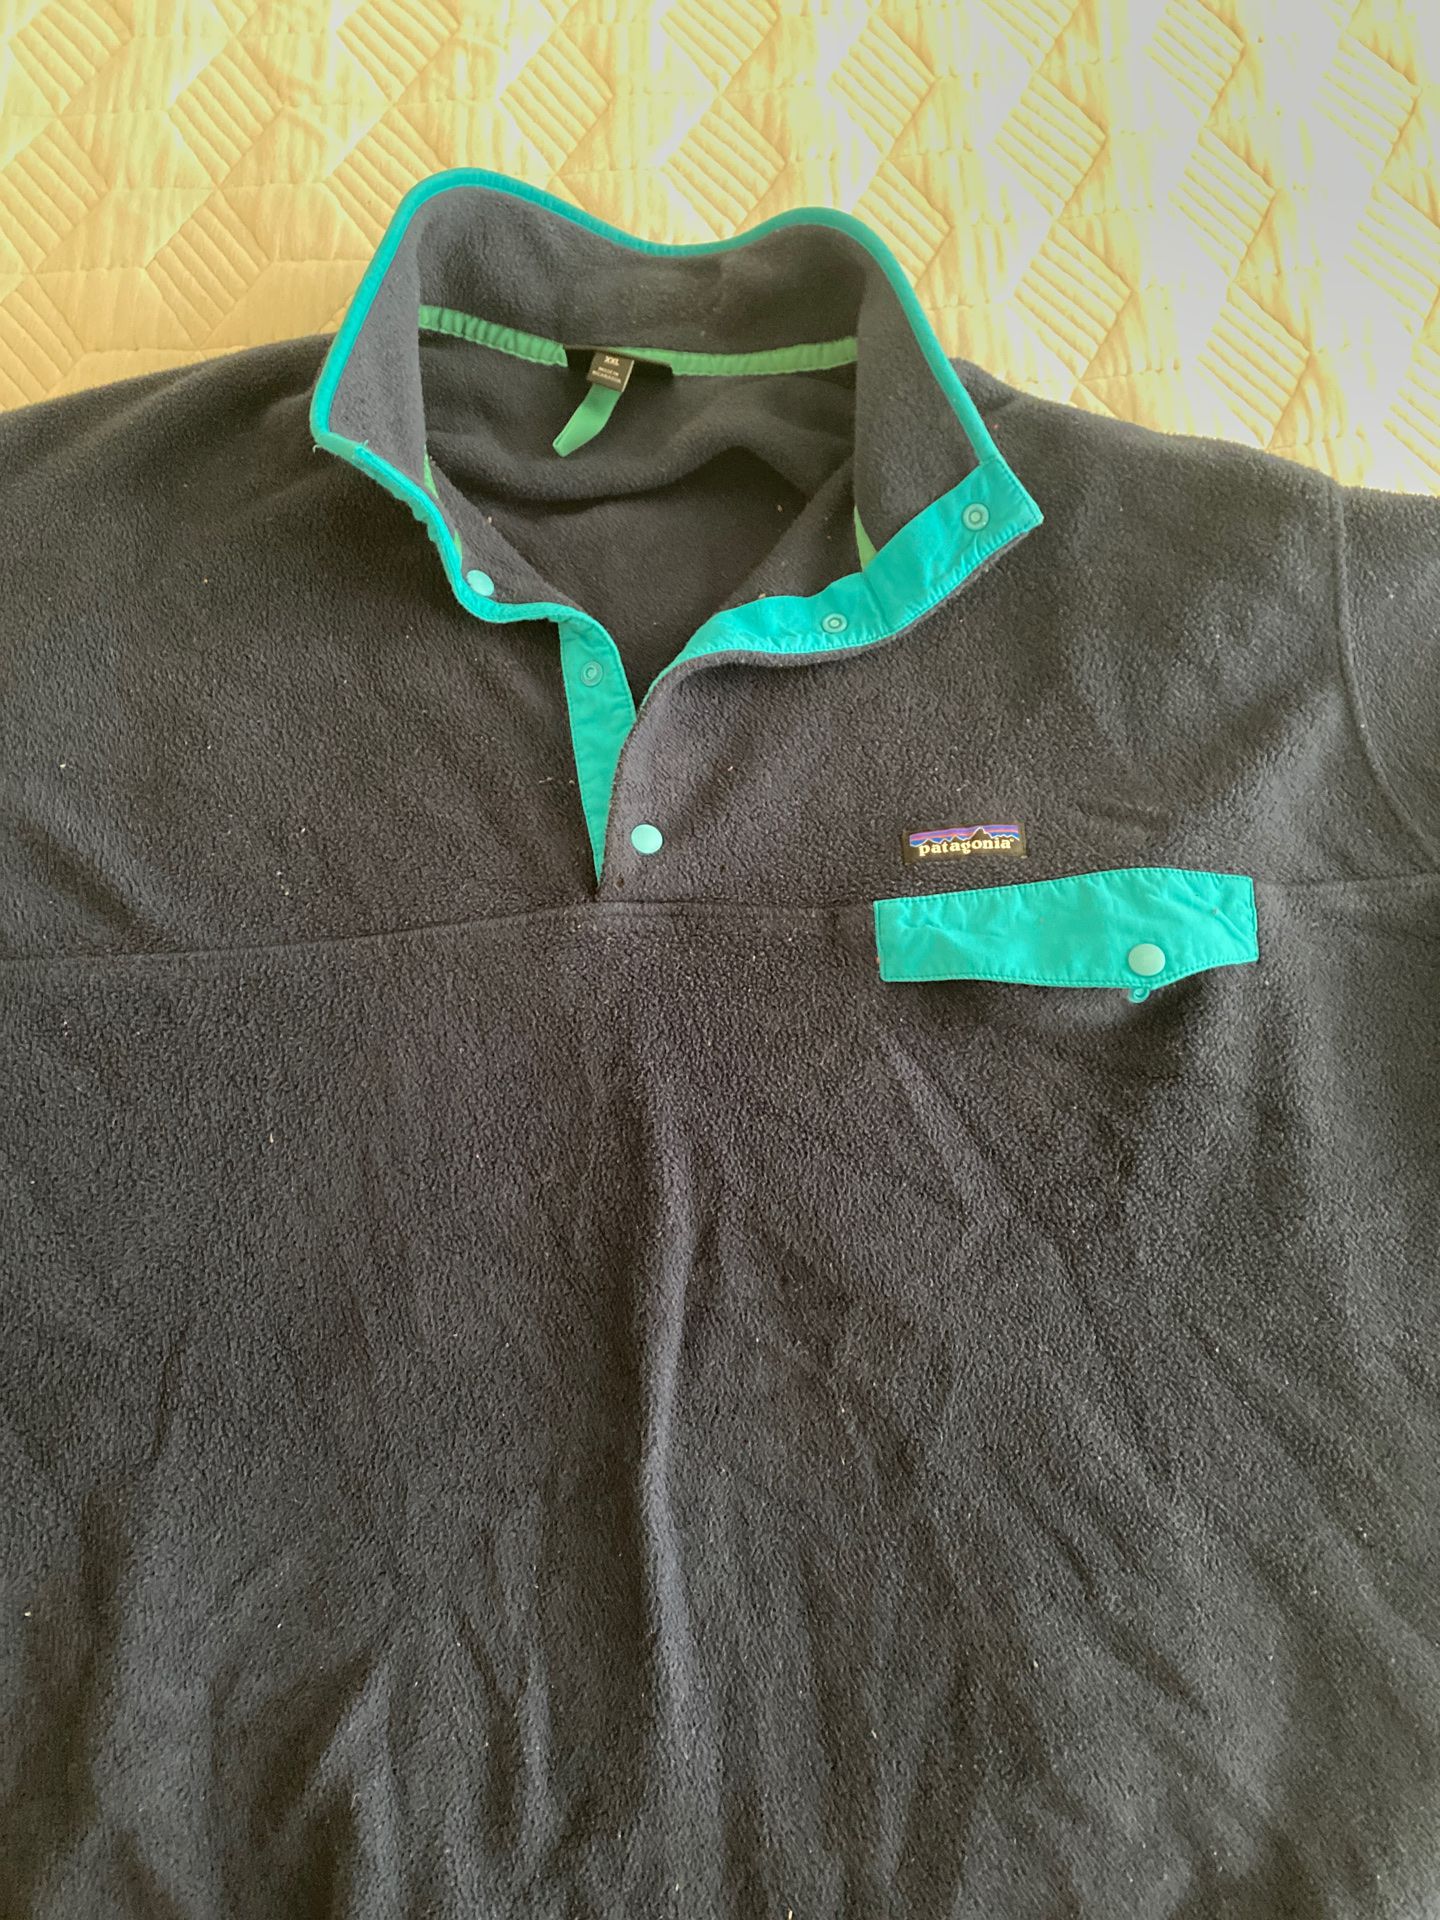 Patagonia Synchilla - Navy Blue and Teal - XXL